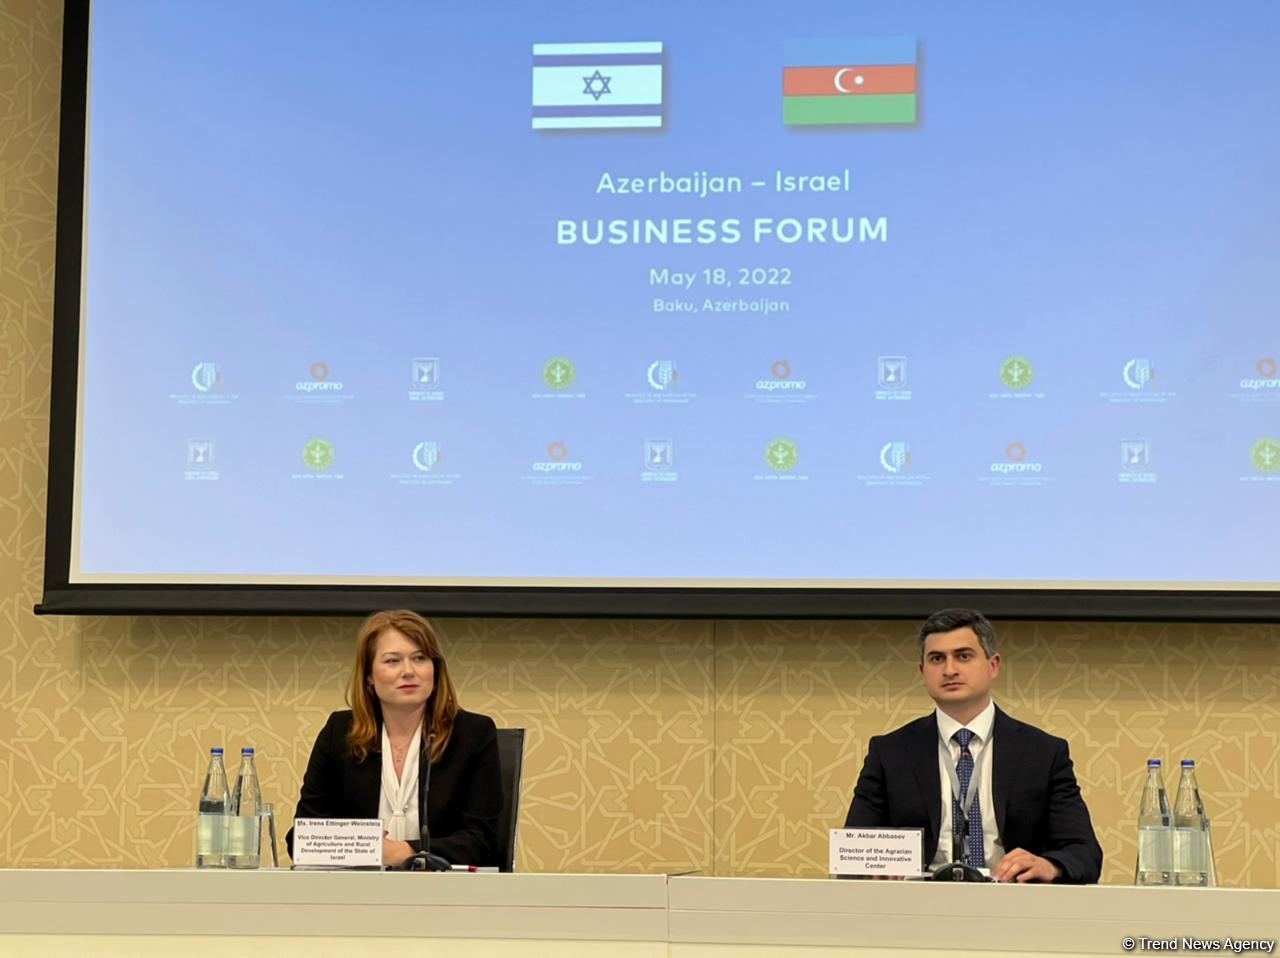 Azerbaijan welcomes Israeli business - head of Center for Agrarian Science (PHOTO)